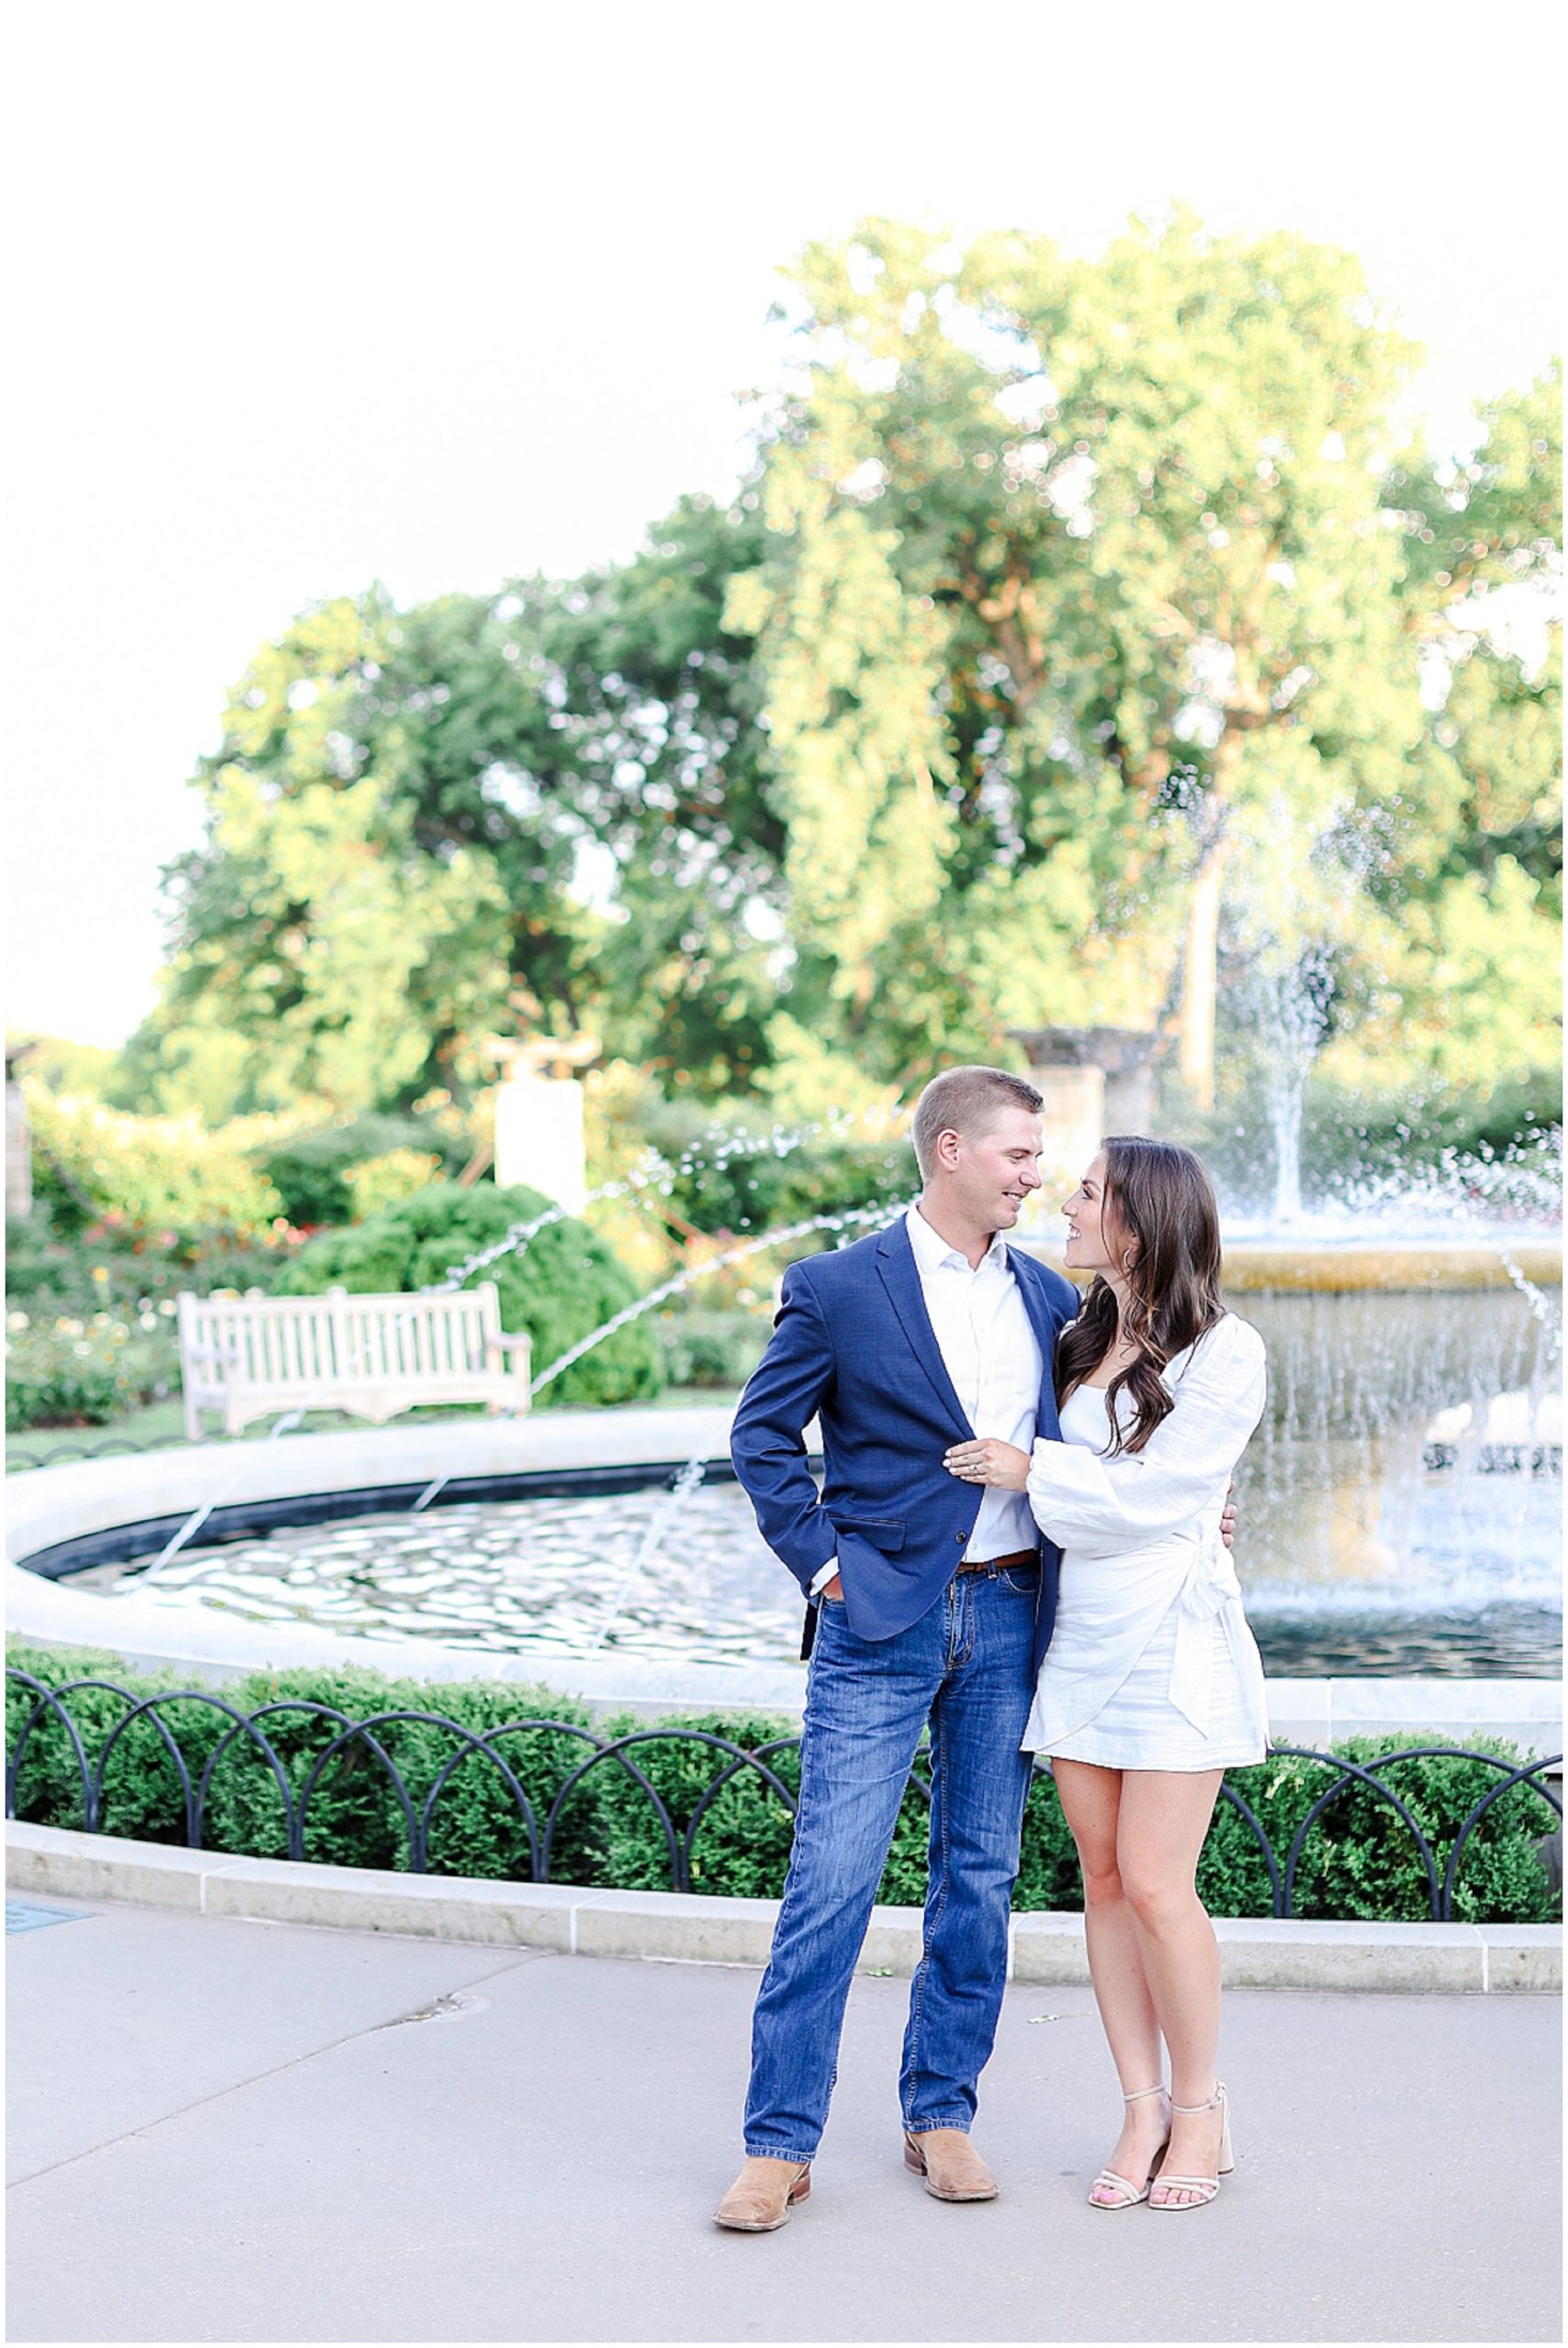 Where to take photos in Kansas City - Wedding and Engagement Photos Overland Park Kansas - Mariam Saifan Photography - Loose Park - Light and Airy Wedding Photographer  - engagement photos with a fountain 